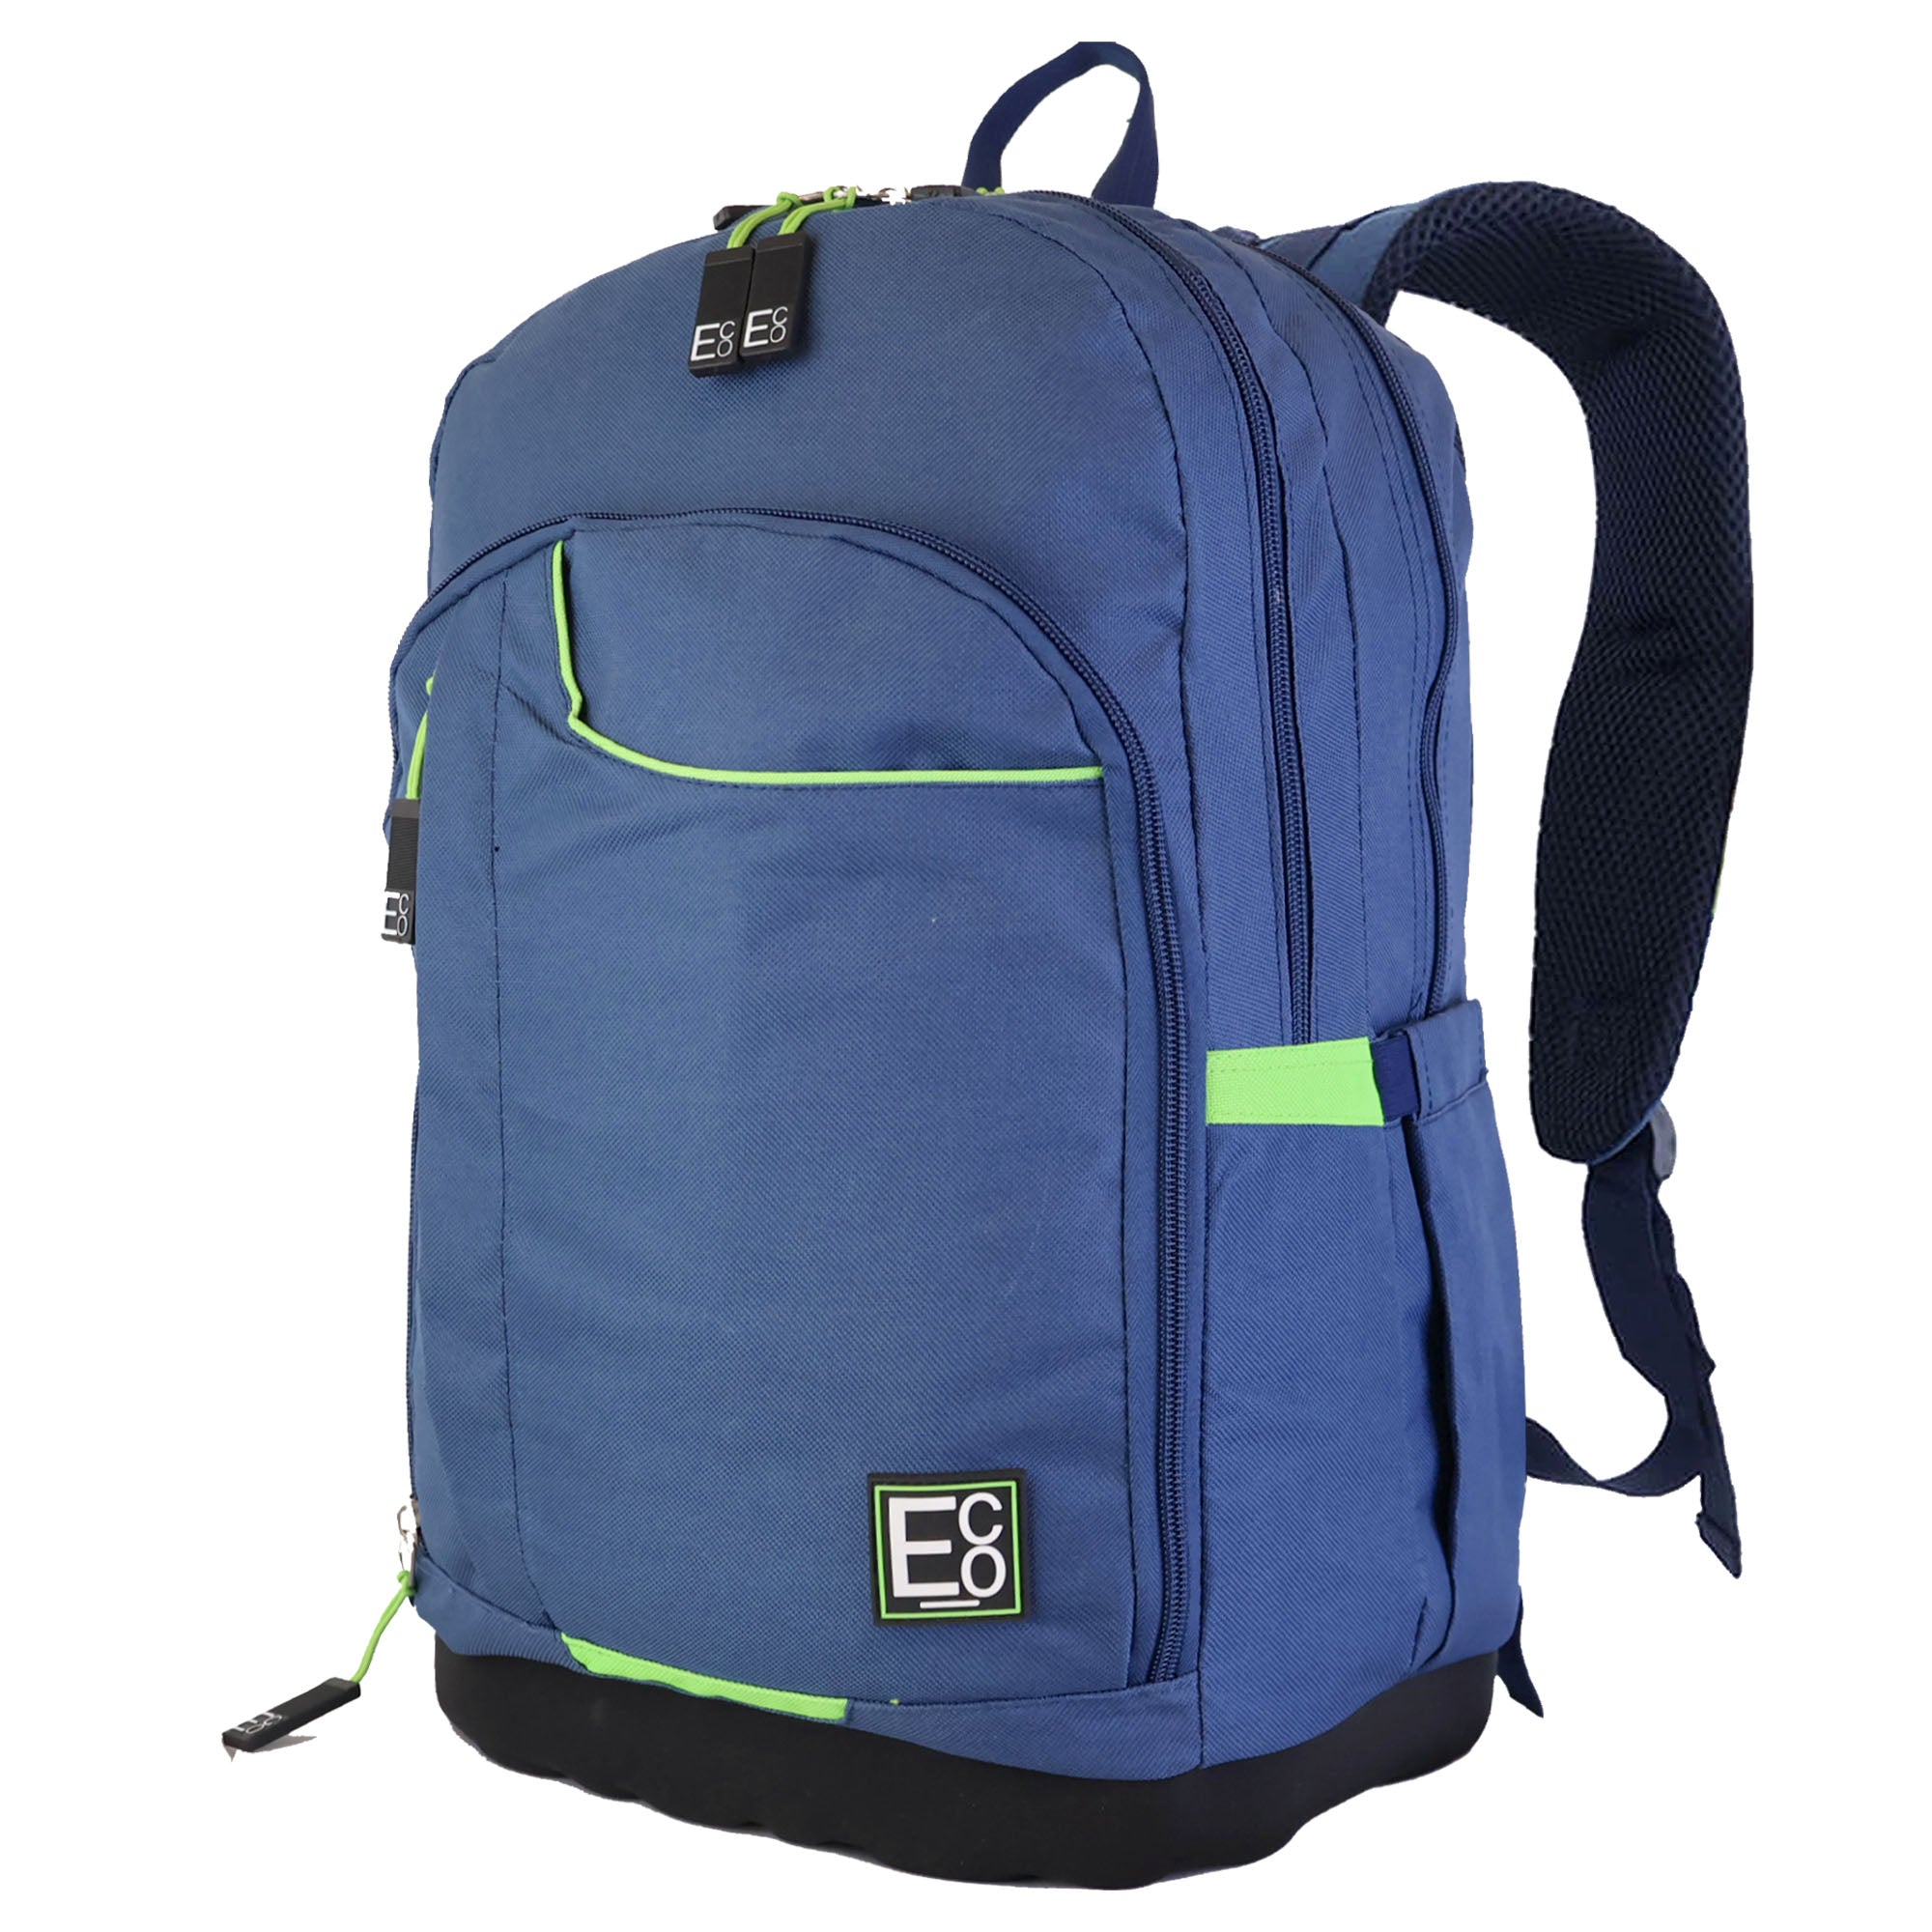 All Essential Student Backpack - Navy